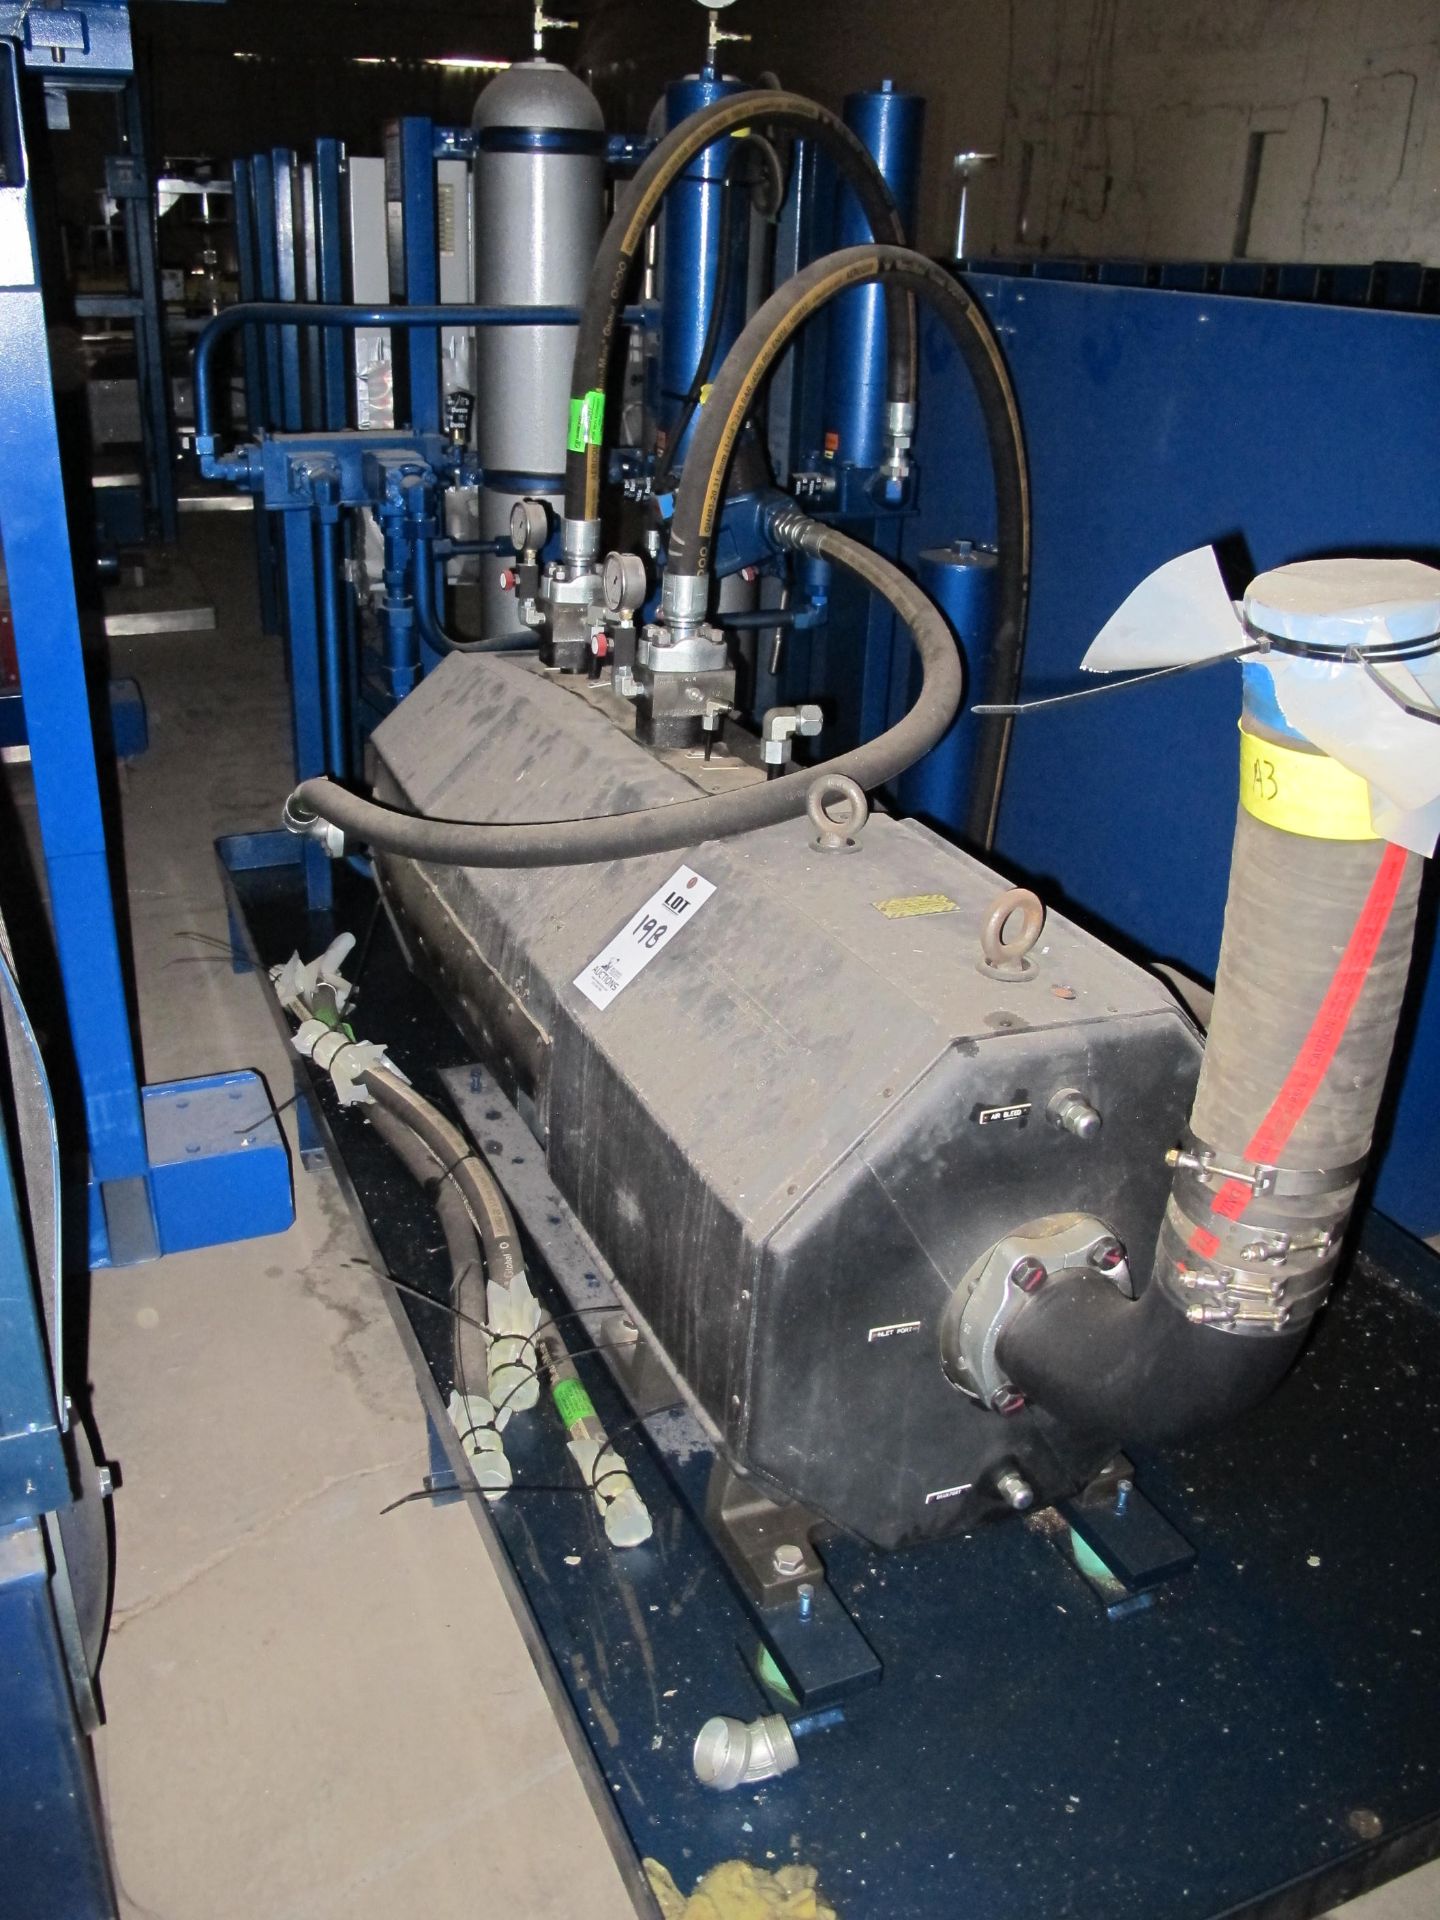 EATON VICKERS HYDRAULIC PUMP MOTOR WITH FILTERS, LOADING & HANDLING FEE: $200